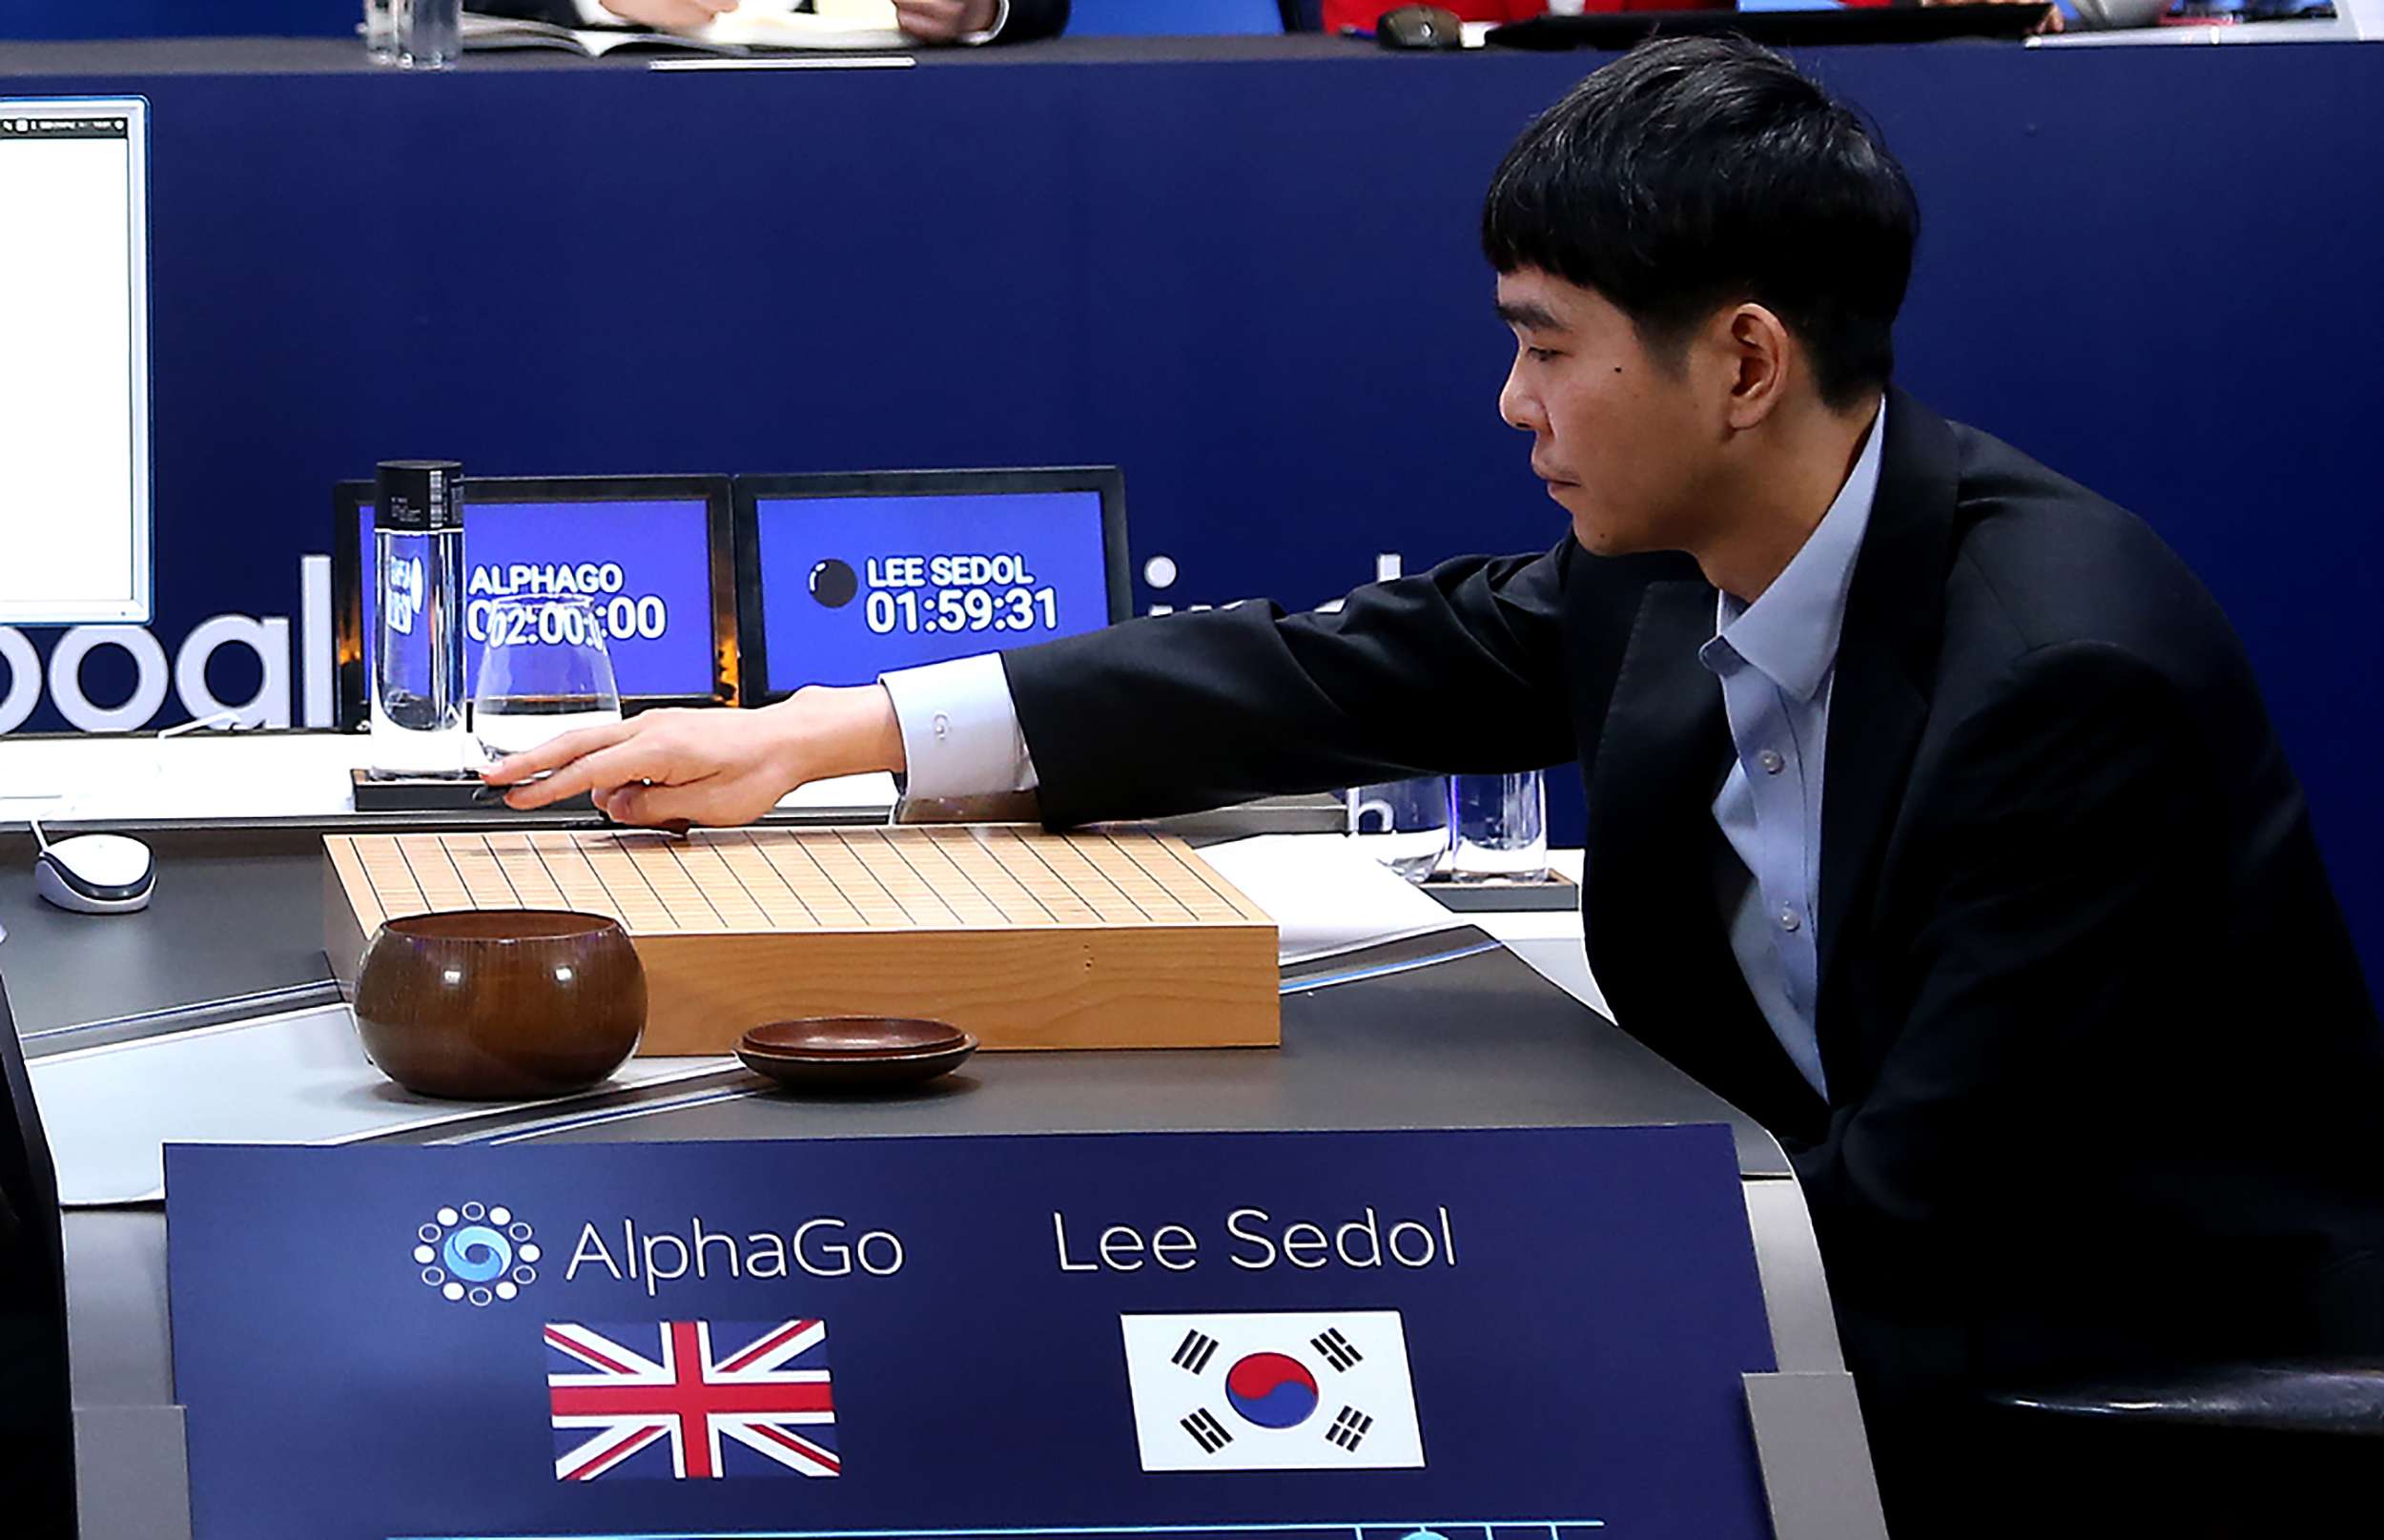 Lee Sedol, one of the greatest modern players of Go, makes a move during the Google DeepMind Challenge Match against Google-developed supercomputer AlphaGo on March 12, 2016. Photo: AFP